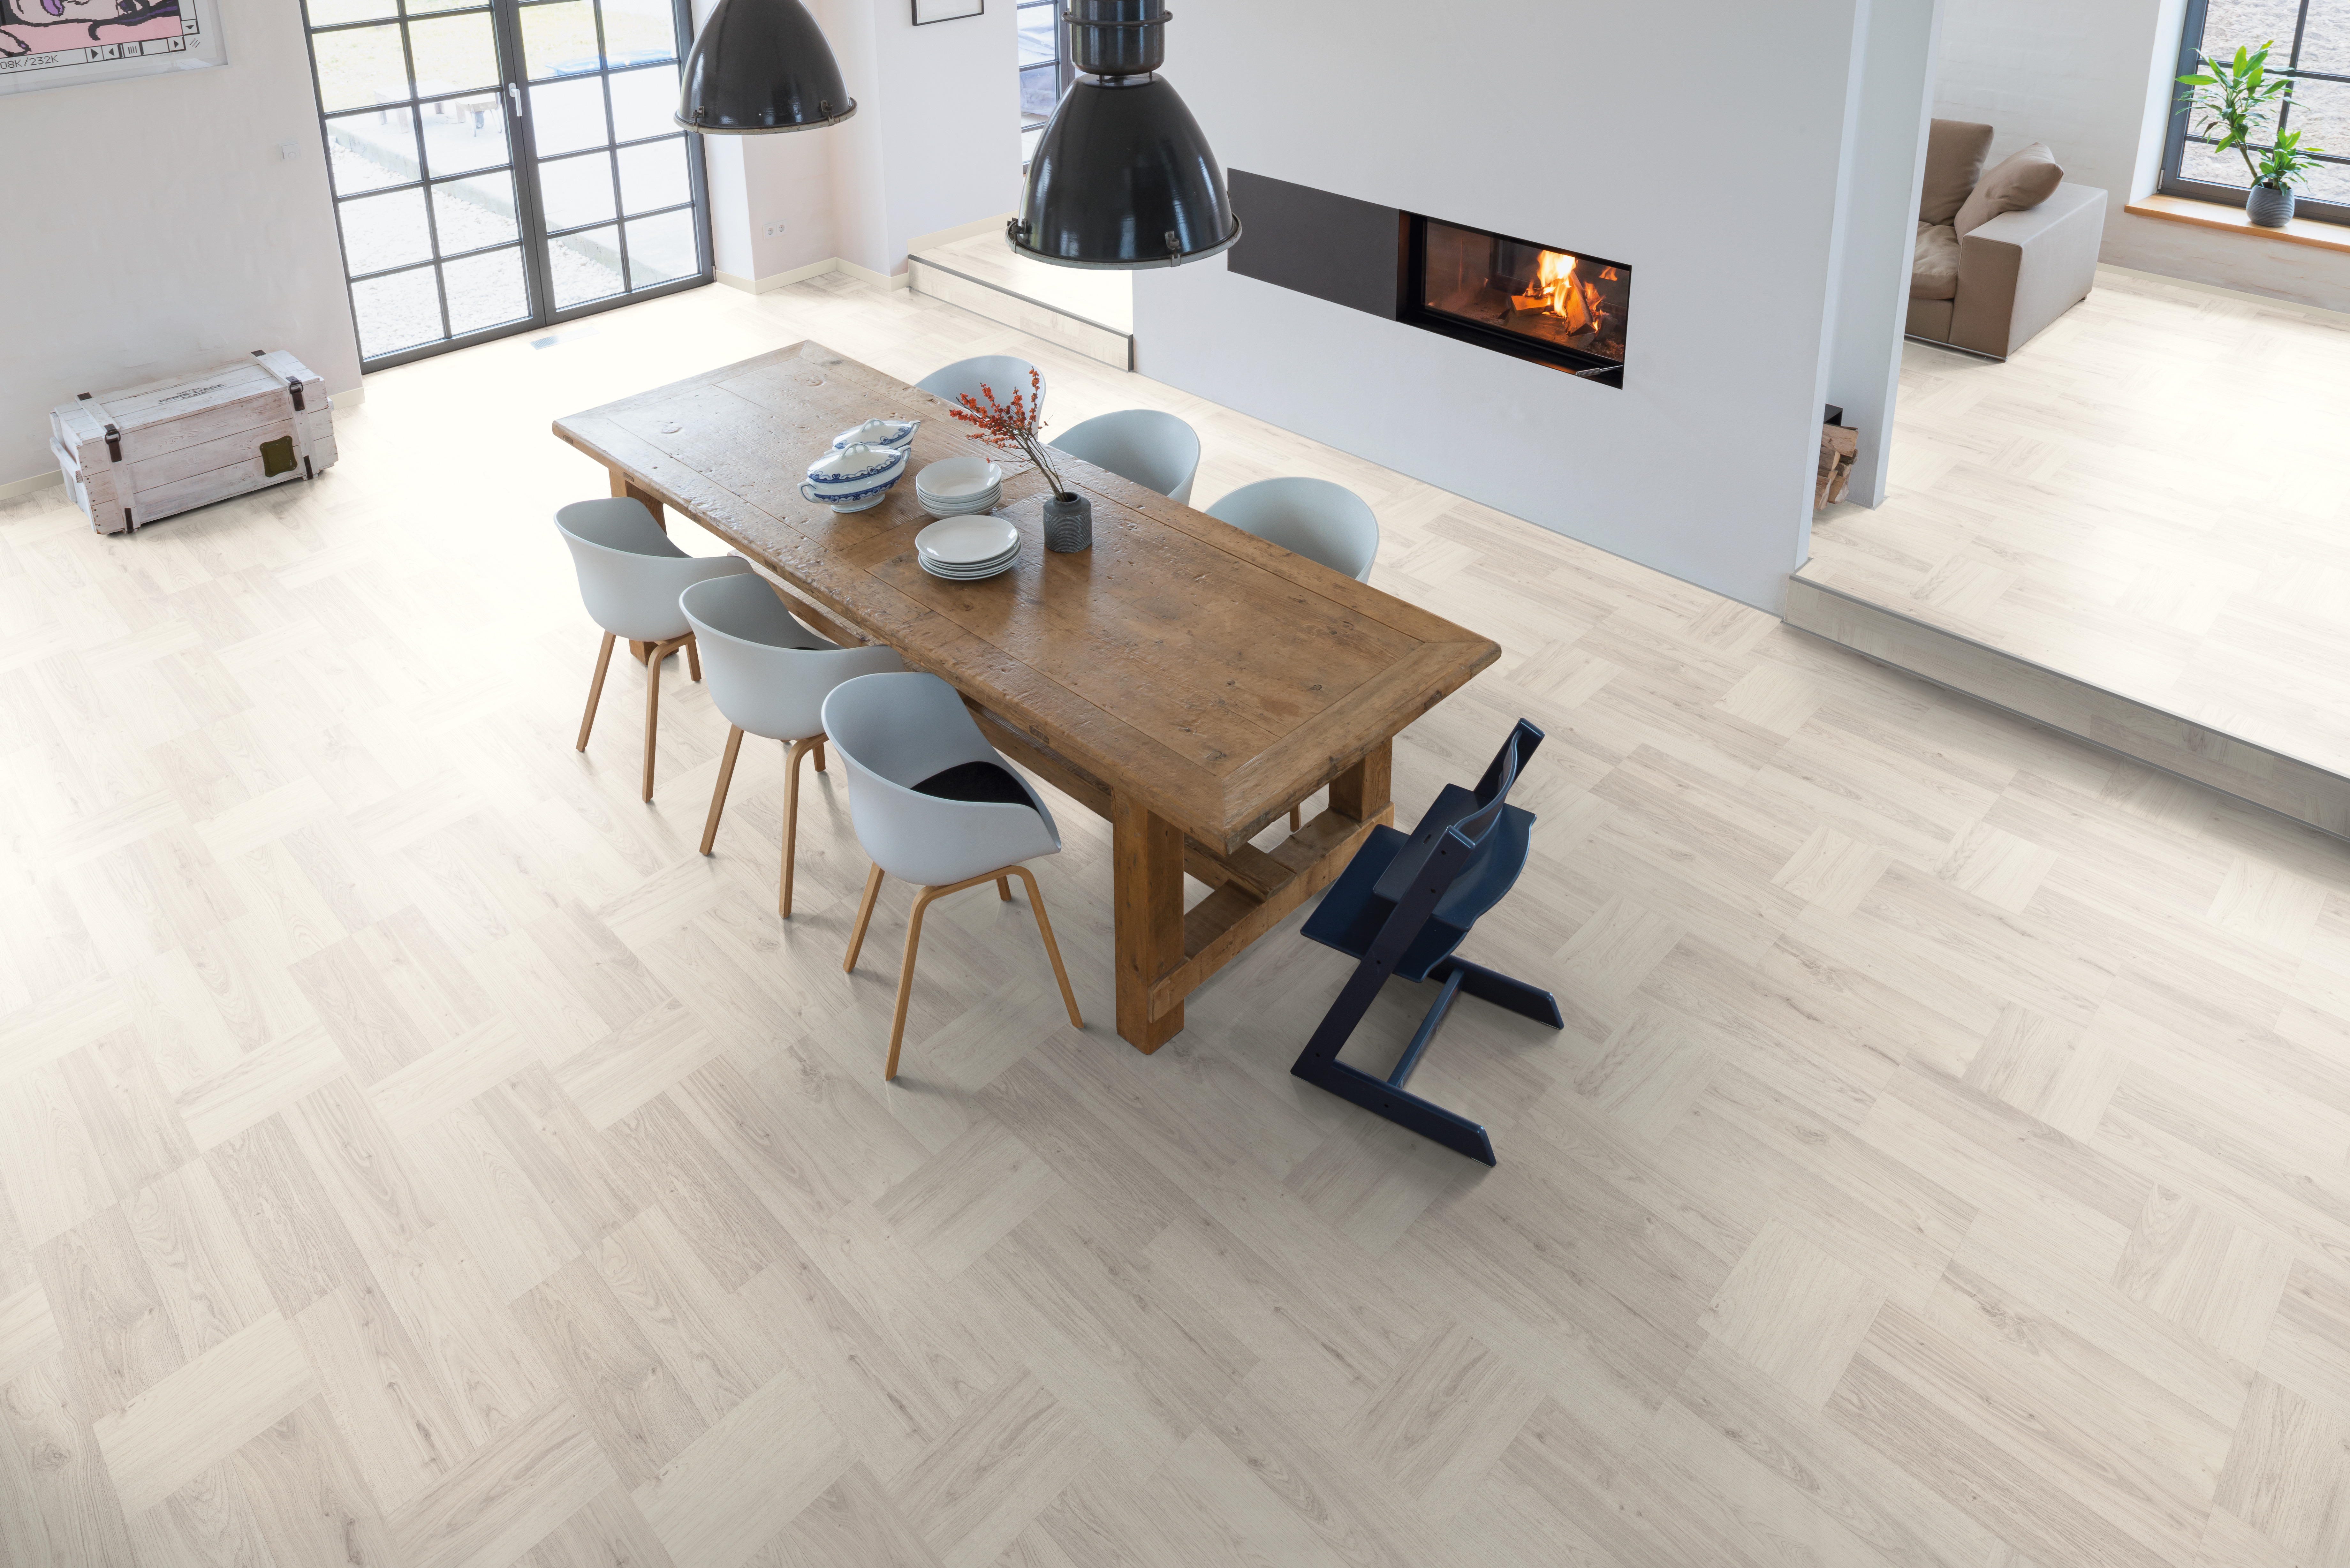 Have the flooring installed by a professional - easy and convenient